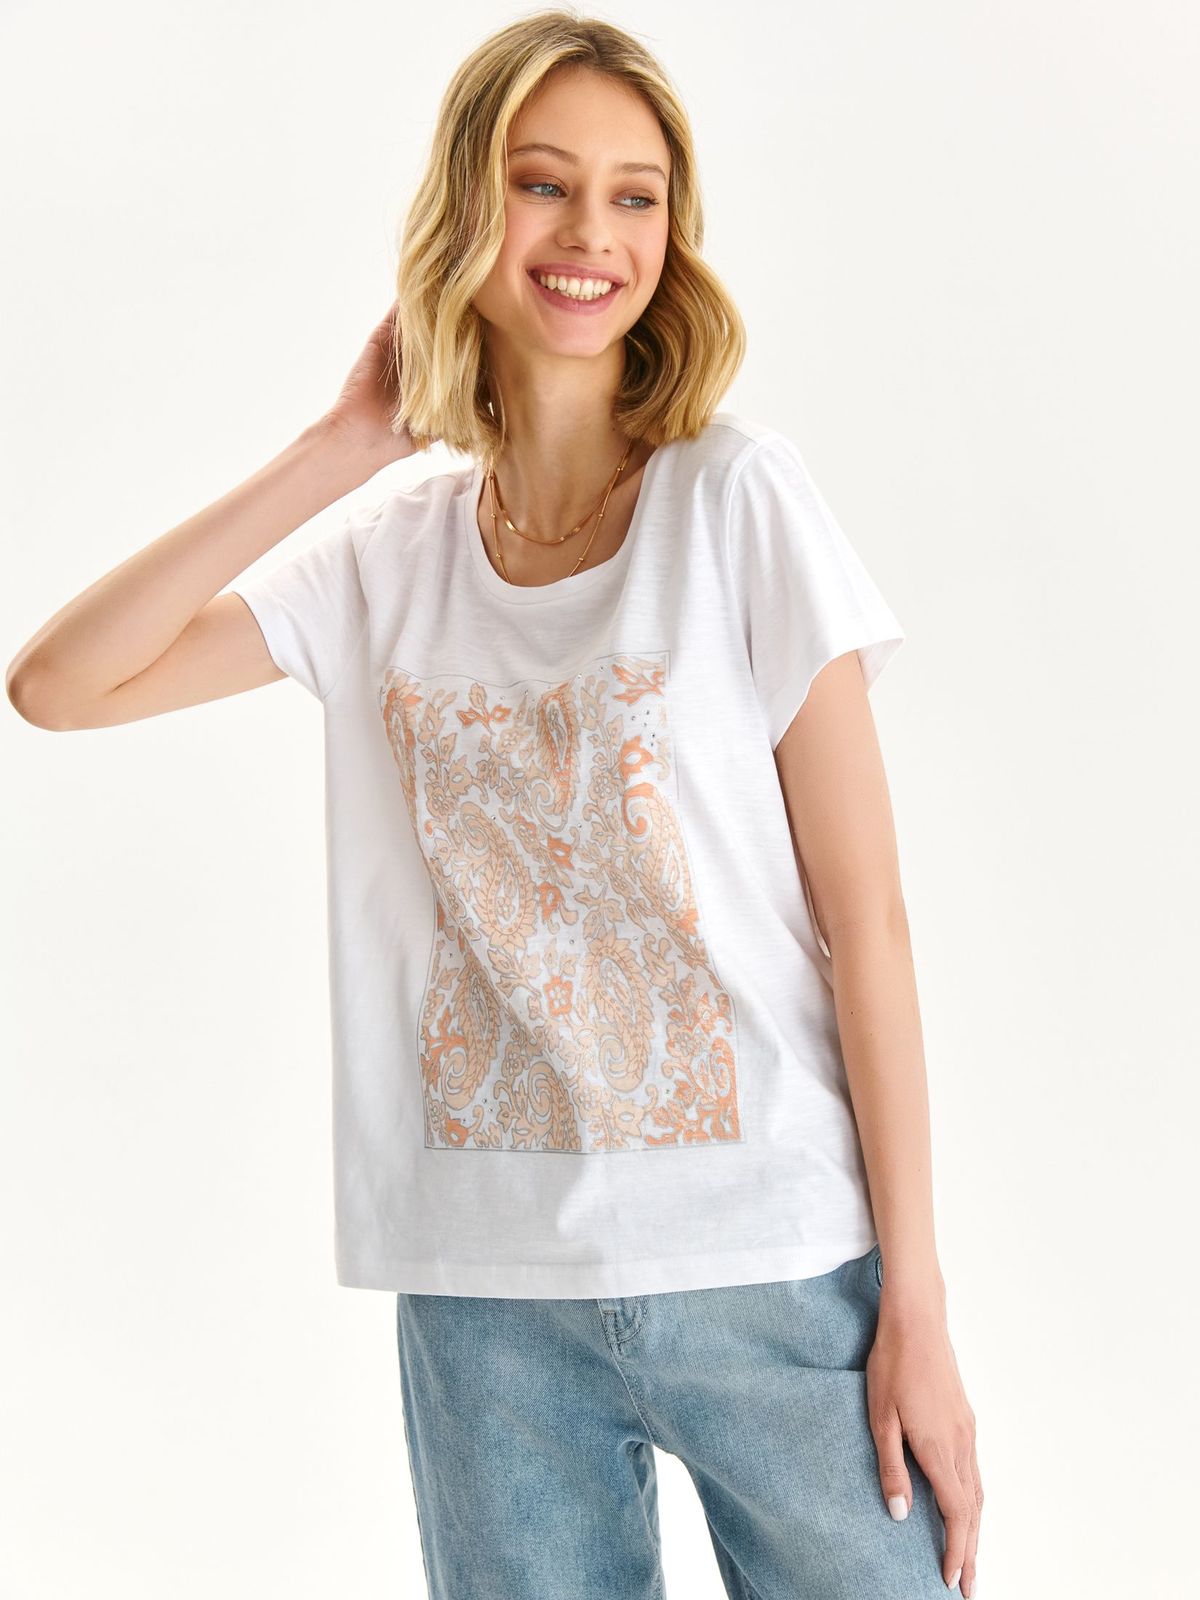 White t-shirt slightly elastic cotton loose fit short sleeves